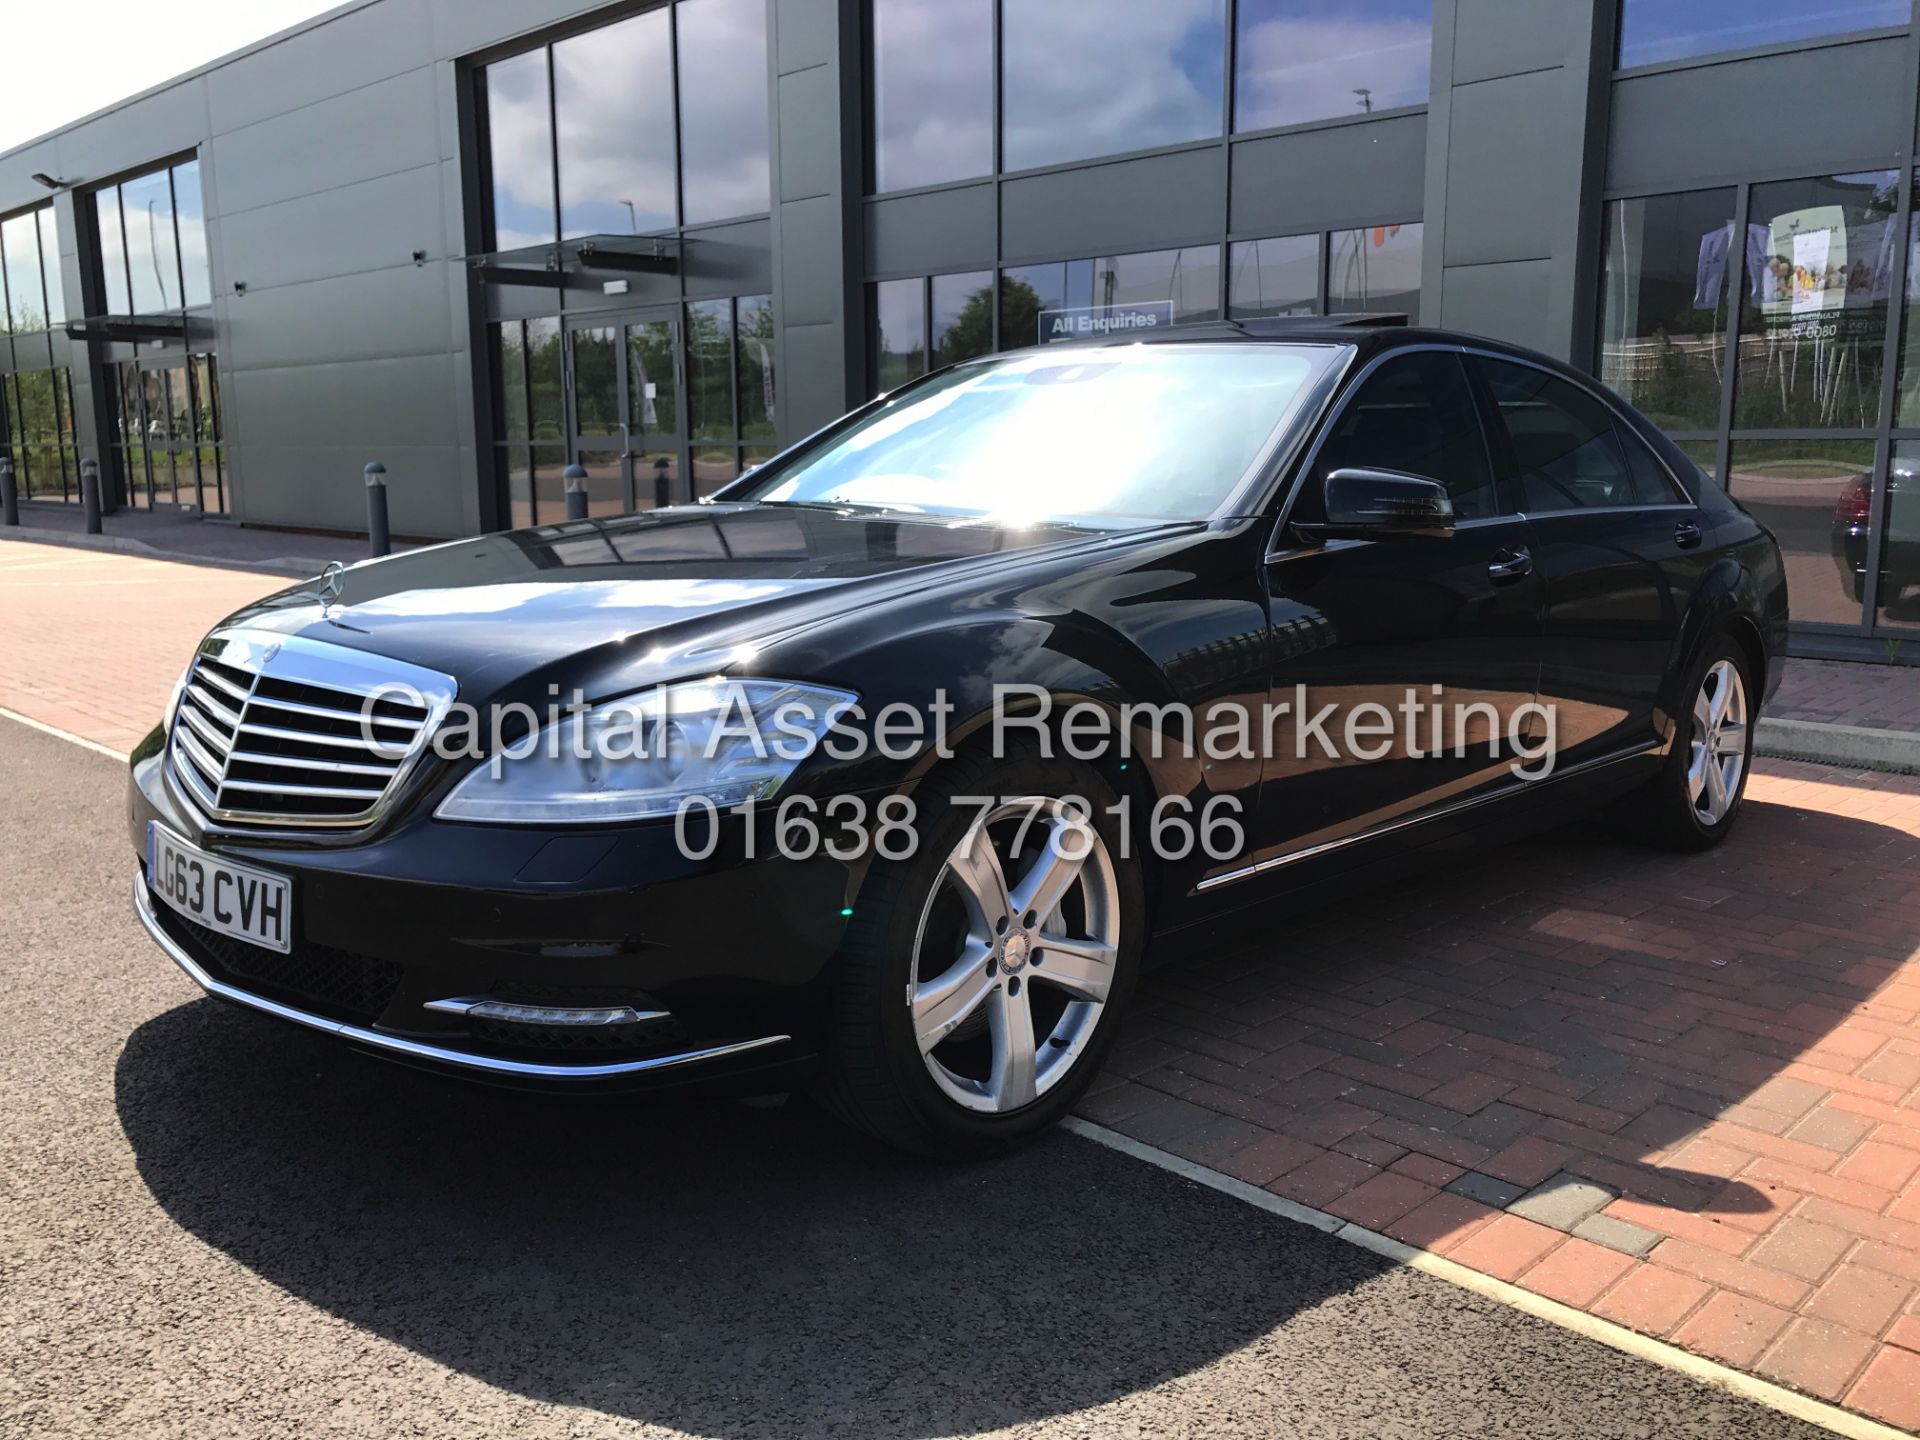 (ON SALE) MERCEDES S350CDI (2014 MODEL) LWB LIMO - SAT NAV - GLASS ROOF **ABSOLUTLY LOADED** - Image 4 of 37